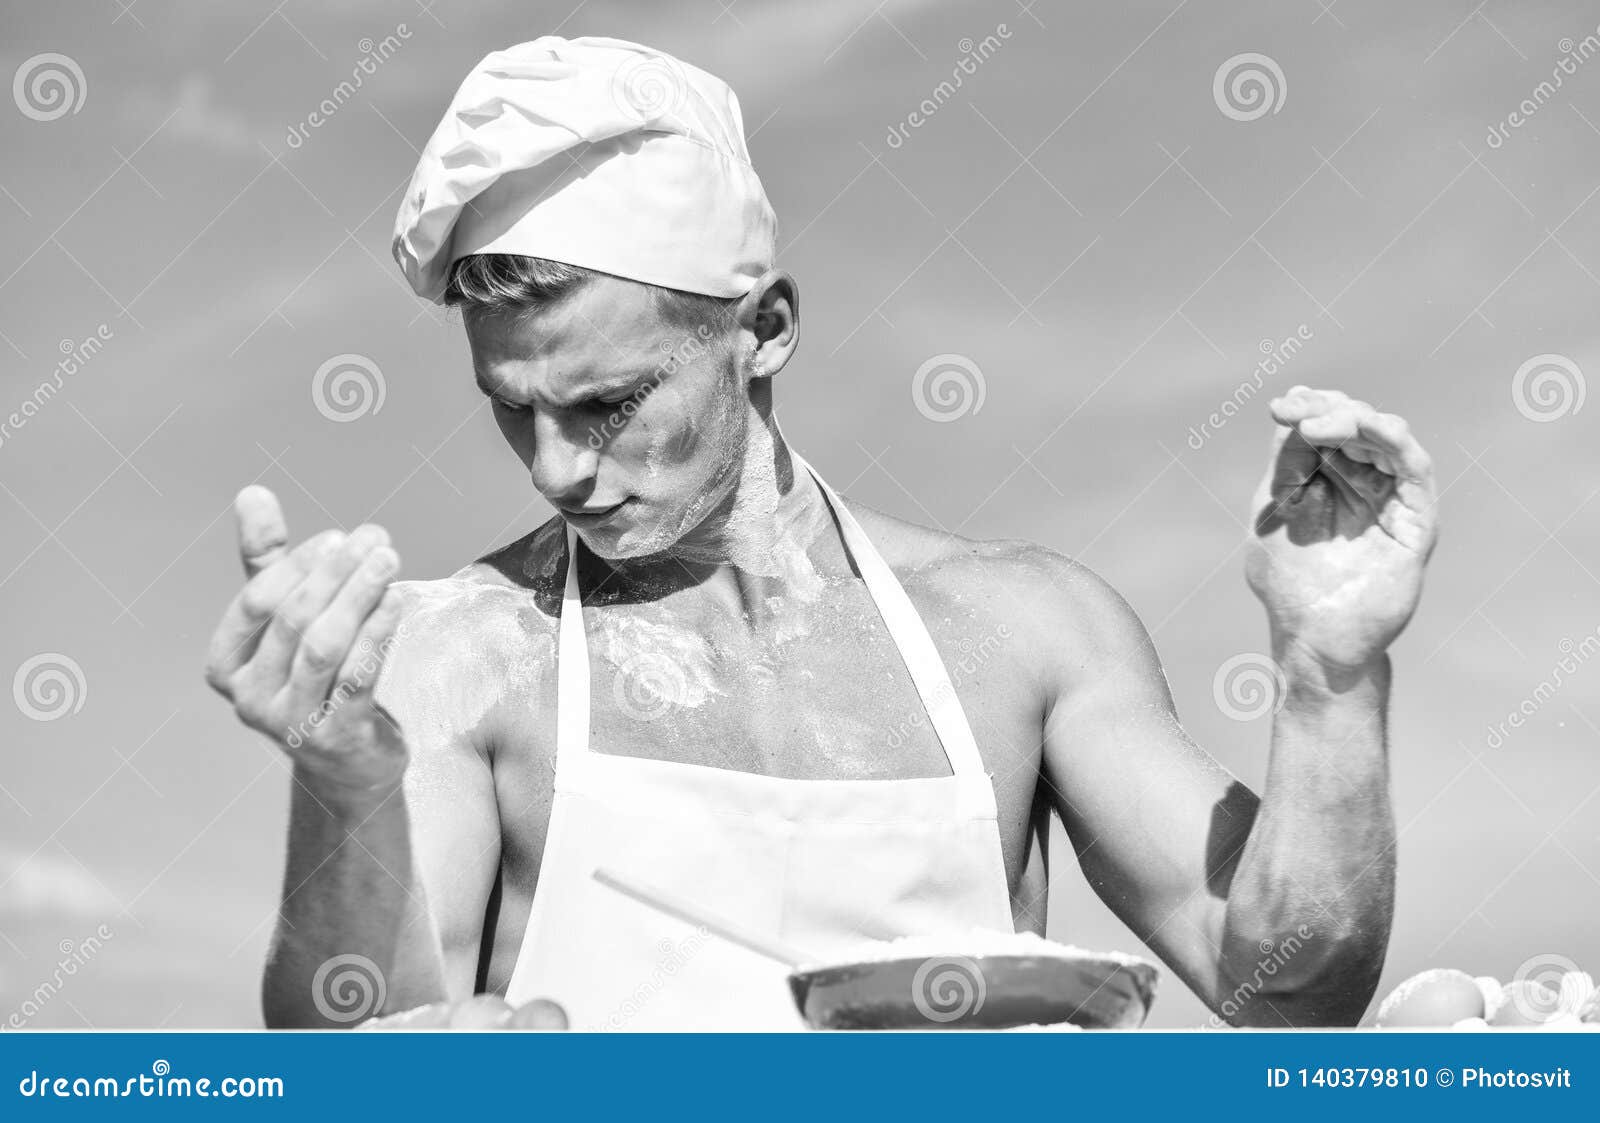 Man On Busy Face Wears Cooking Hat And Apron Sky On Background Cook Or Chef With Muscular 